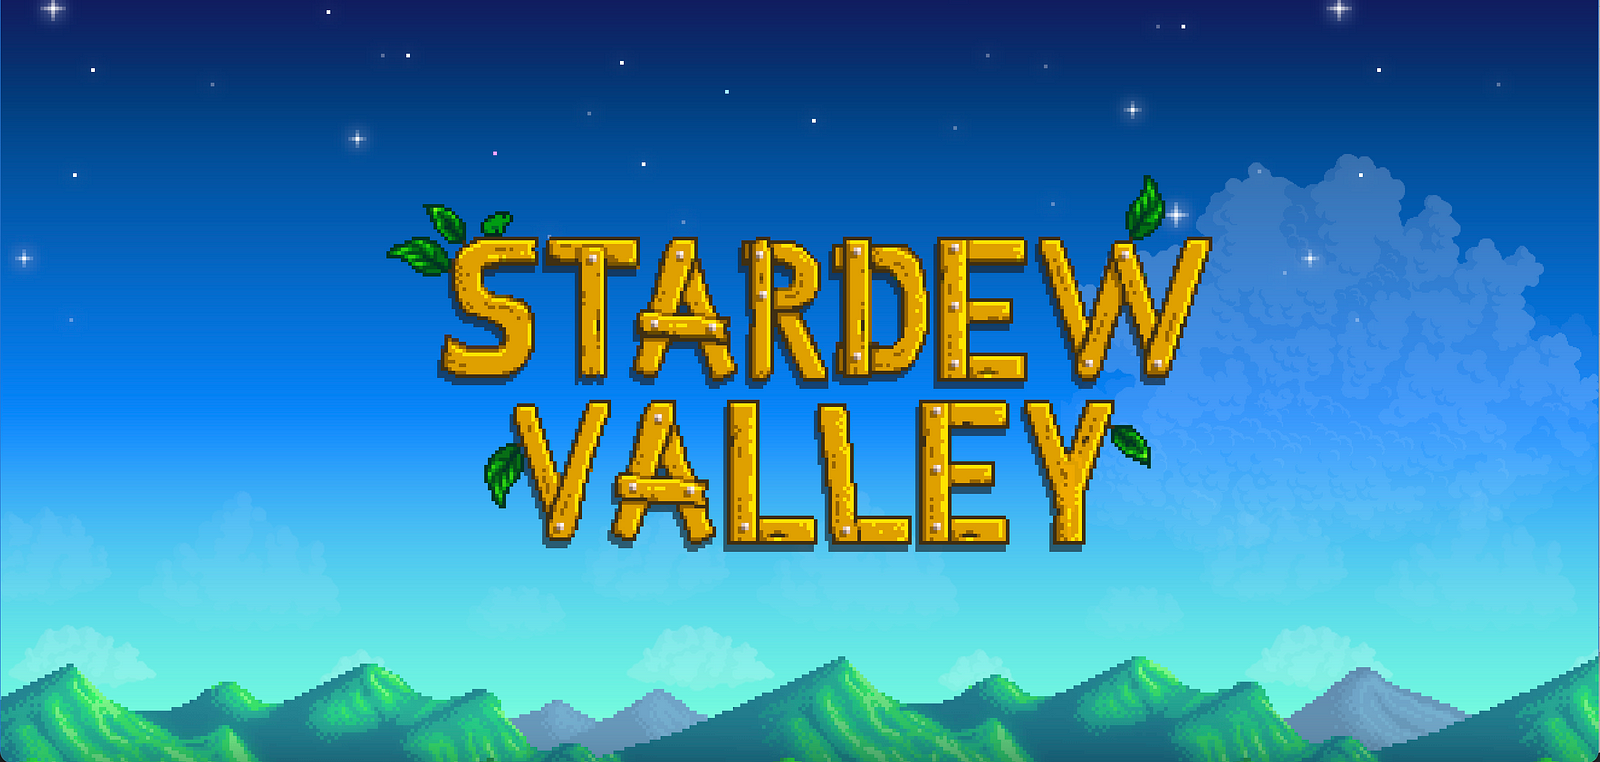 Visually in 16-bit fashion: sign made from wood spelling out “Stardew Valley”, on a backdrop of the night sky, hint of sunrise, and rolling hills.